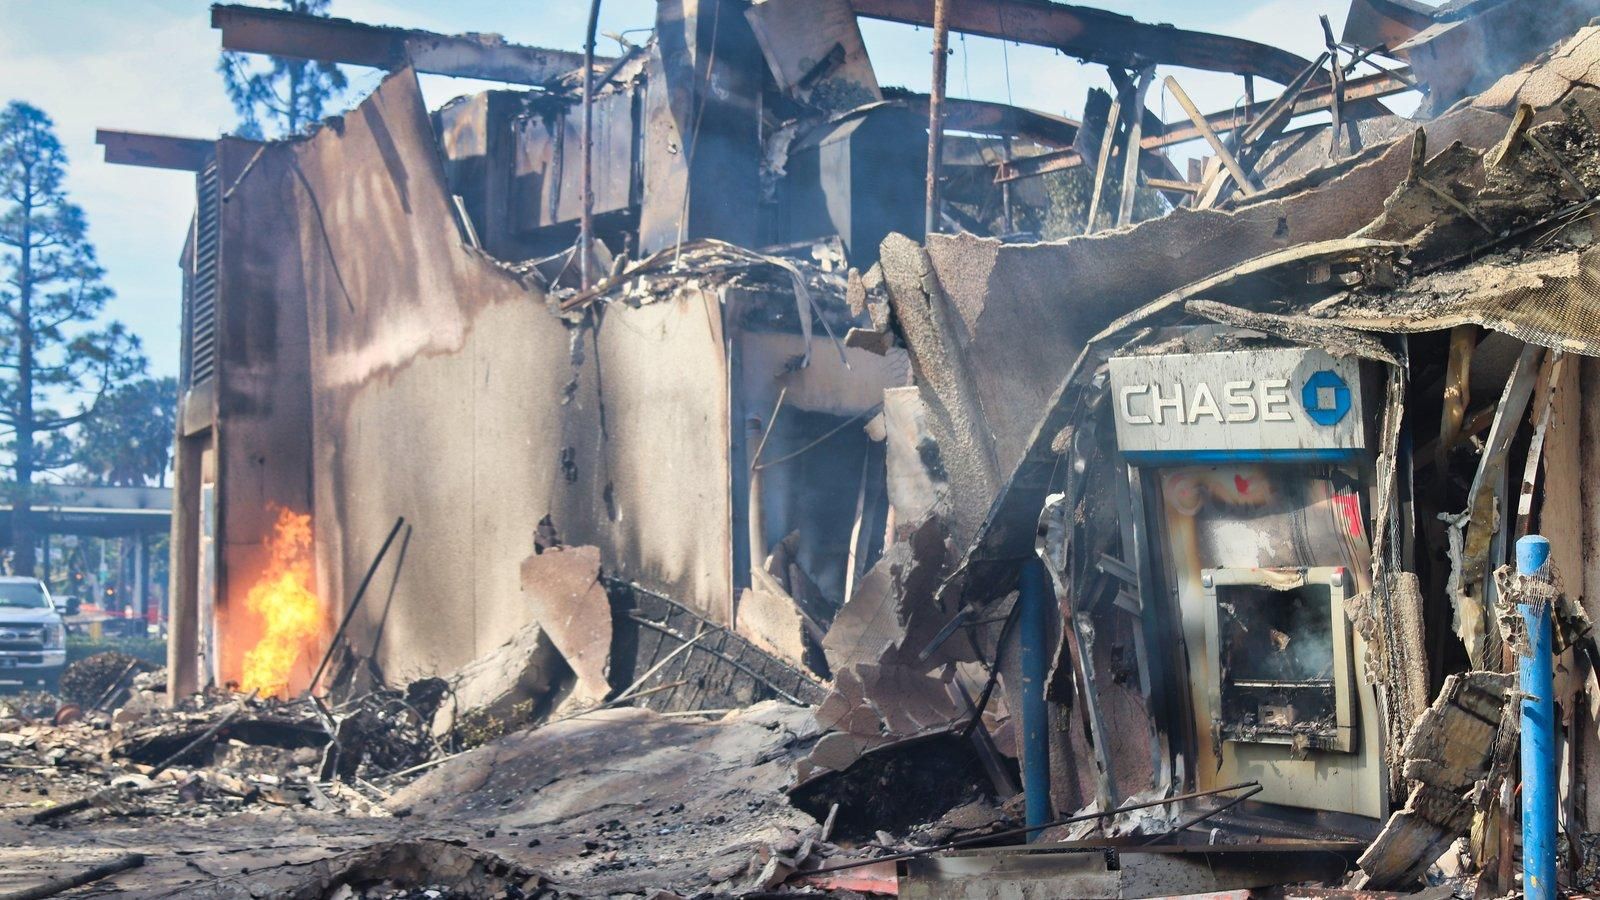 The smoldering wreckage of a former Chase Bank in La Mesa, California, May 31, 2020. (Photo: CC)